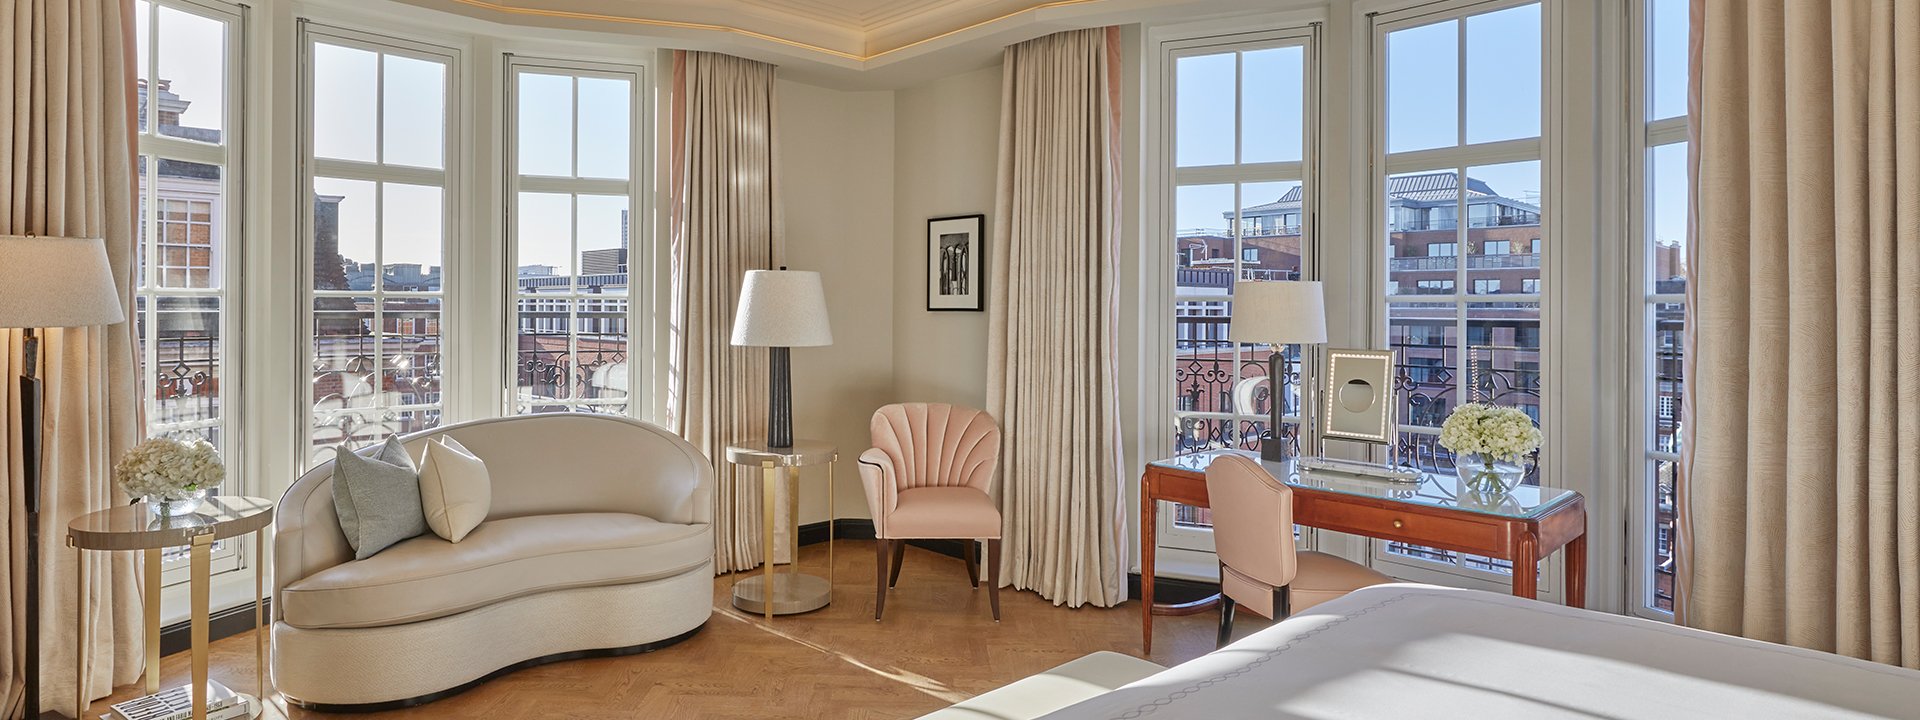 Corner Terrace Suite at Claridge's - room with bed, couch next to the window, armchairs and a view on London rooftops.